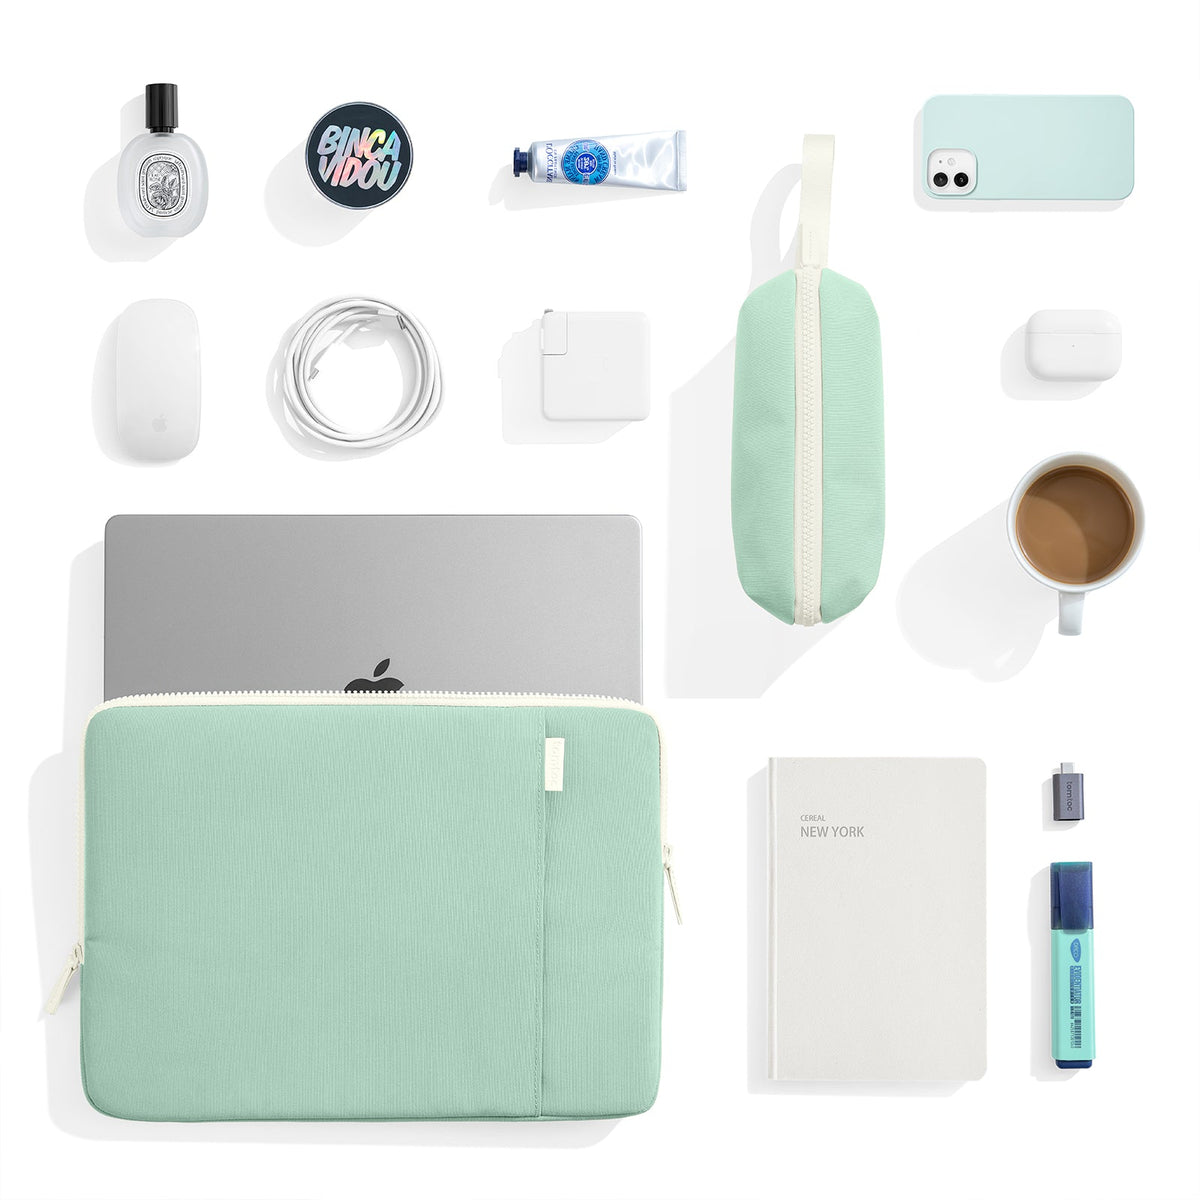 secondary_Defender-A23 Jelly Laptop Sleeve Kit for 13-inch MacBook Air